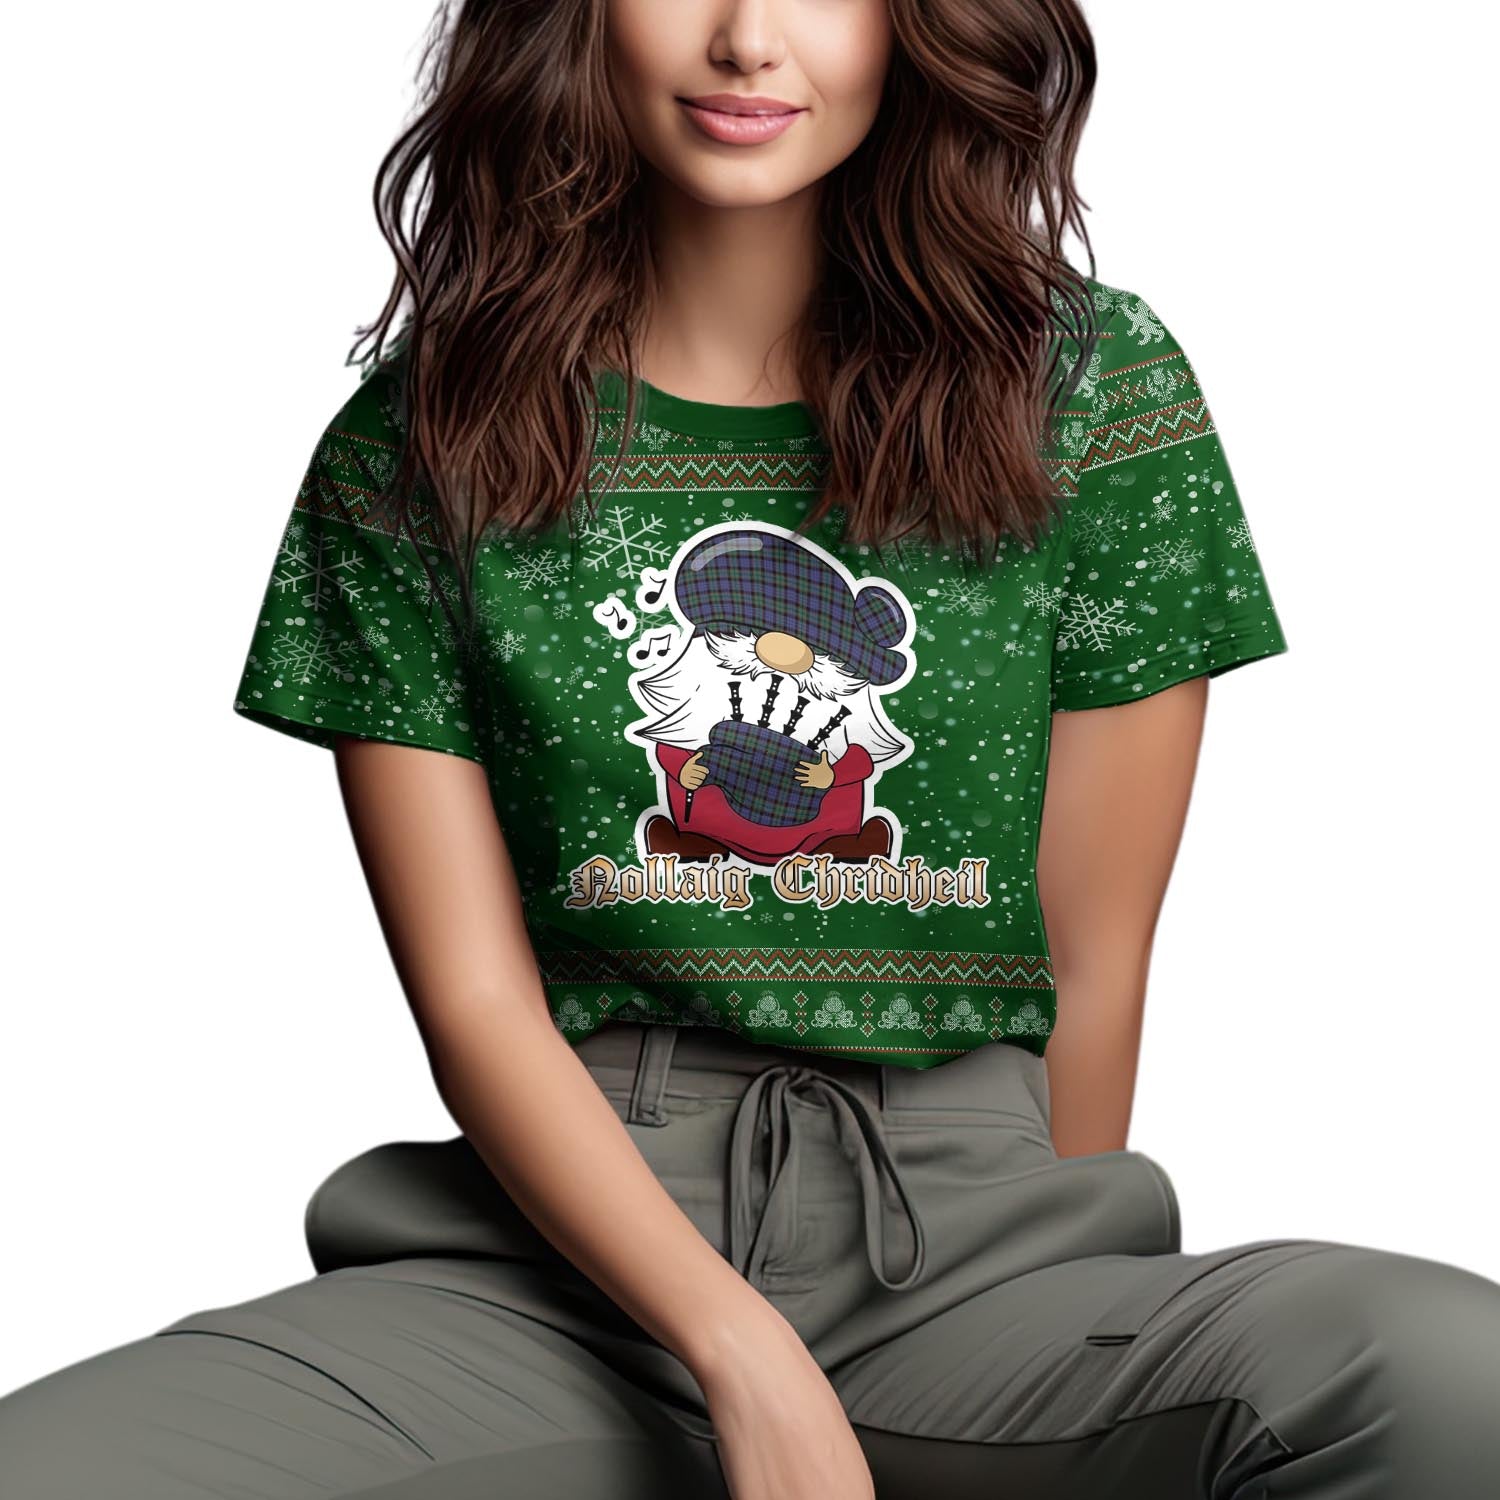 Fletcher Modern Clan Christmas Family T-Shirt with Funny Gnome Playing Bagpipes Women's Shirt Green - Tartanvibesclothing